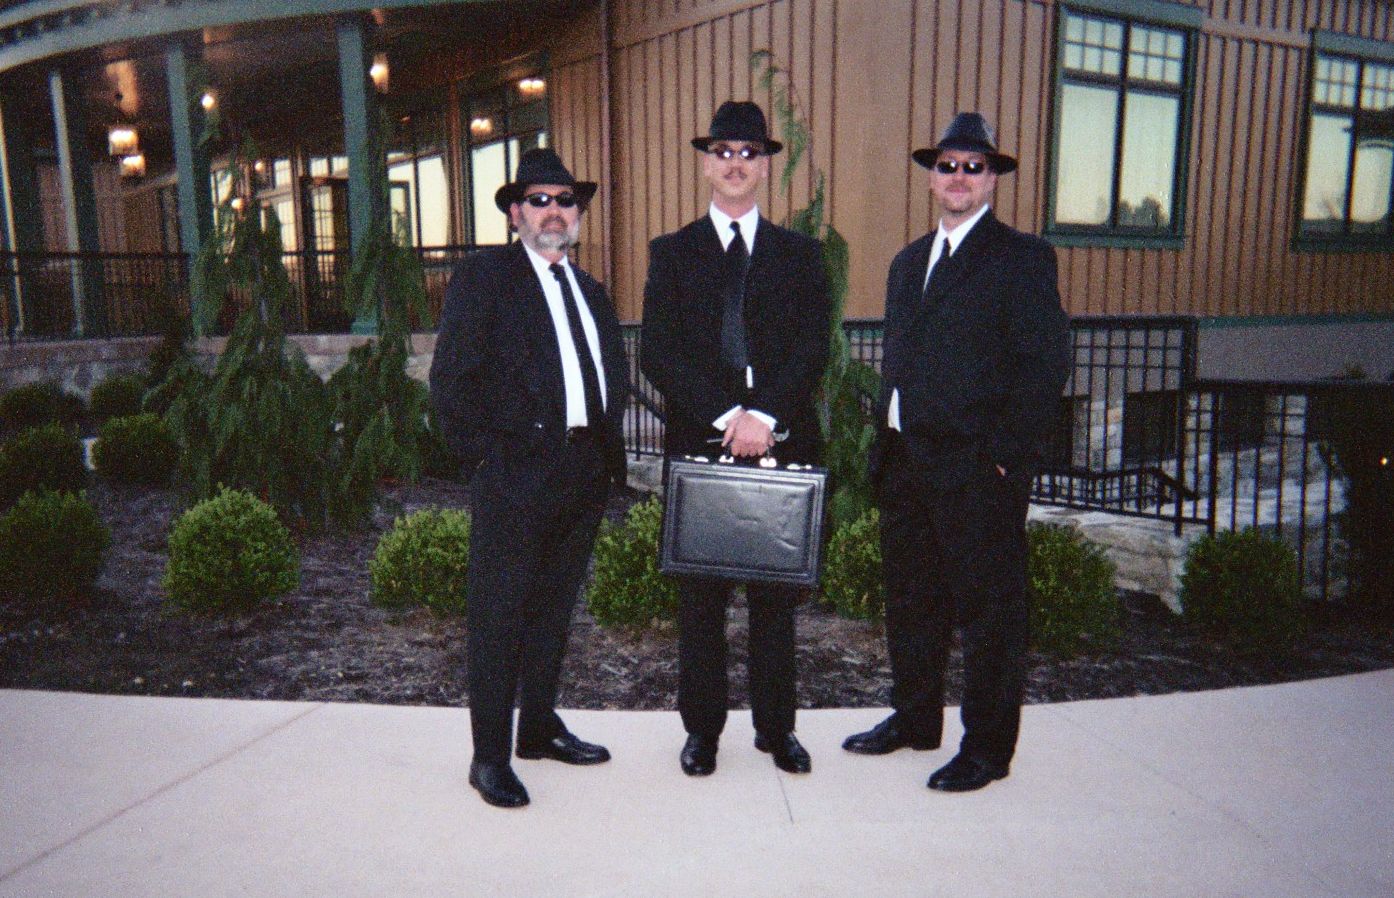 Playing at the Hershey Country Club was fun...especially as the Blues Brothers
